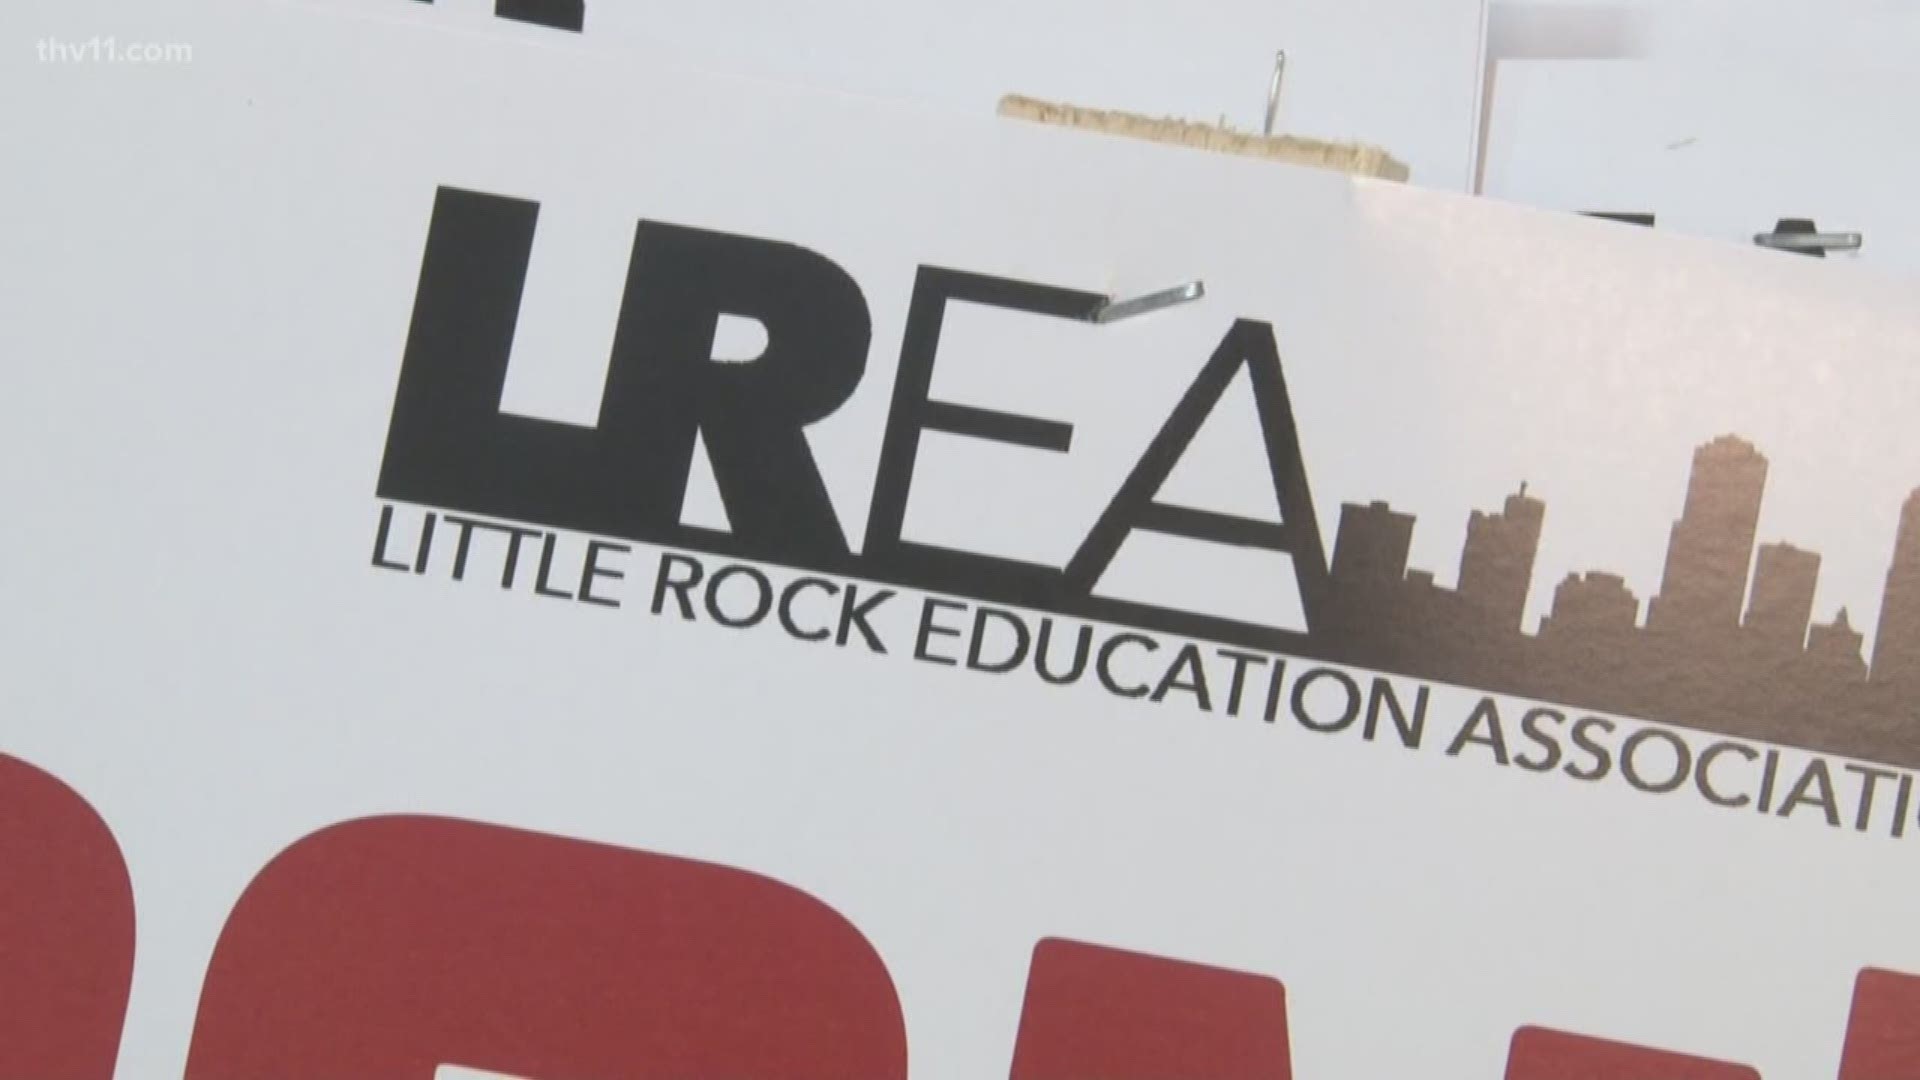 For the first time in more than 30 years Little Rock teachers will go on strike today.